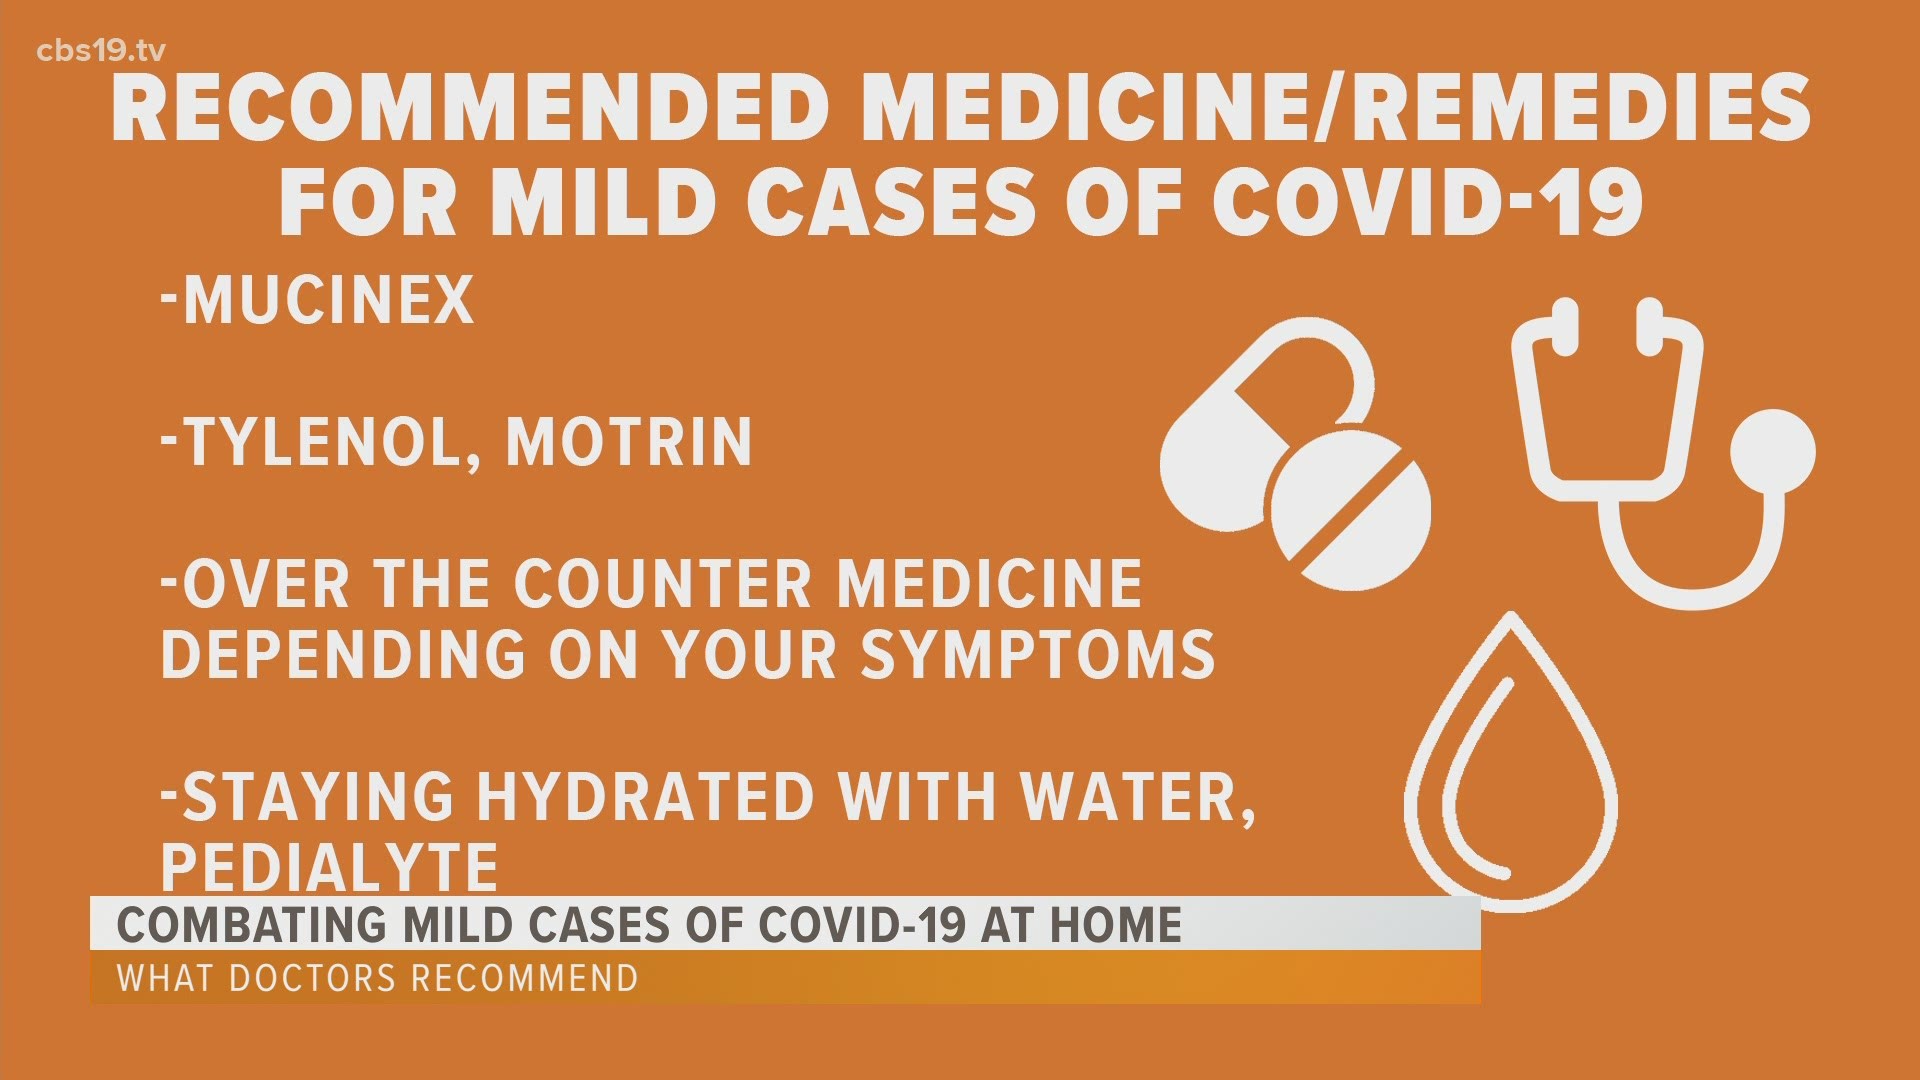 Medicine, remedies doctors are recommending to combat mild cases of COVID-19 at home